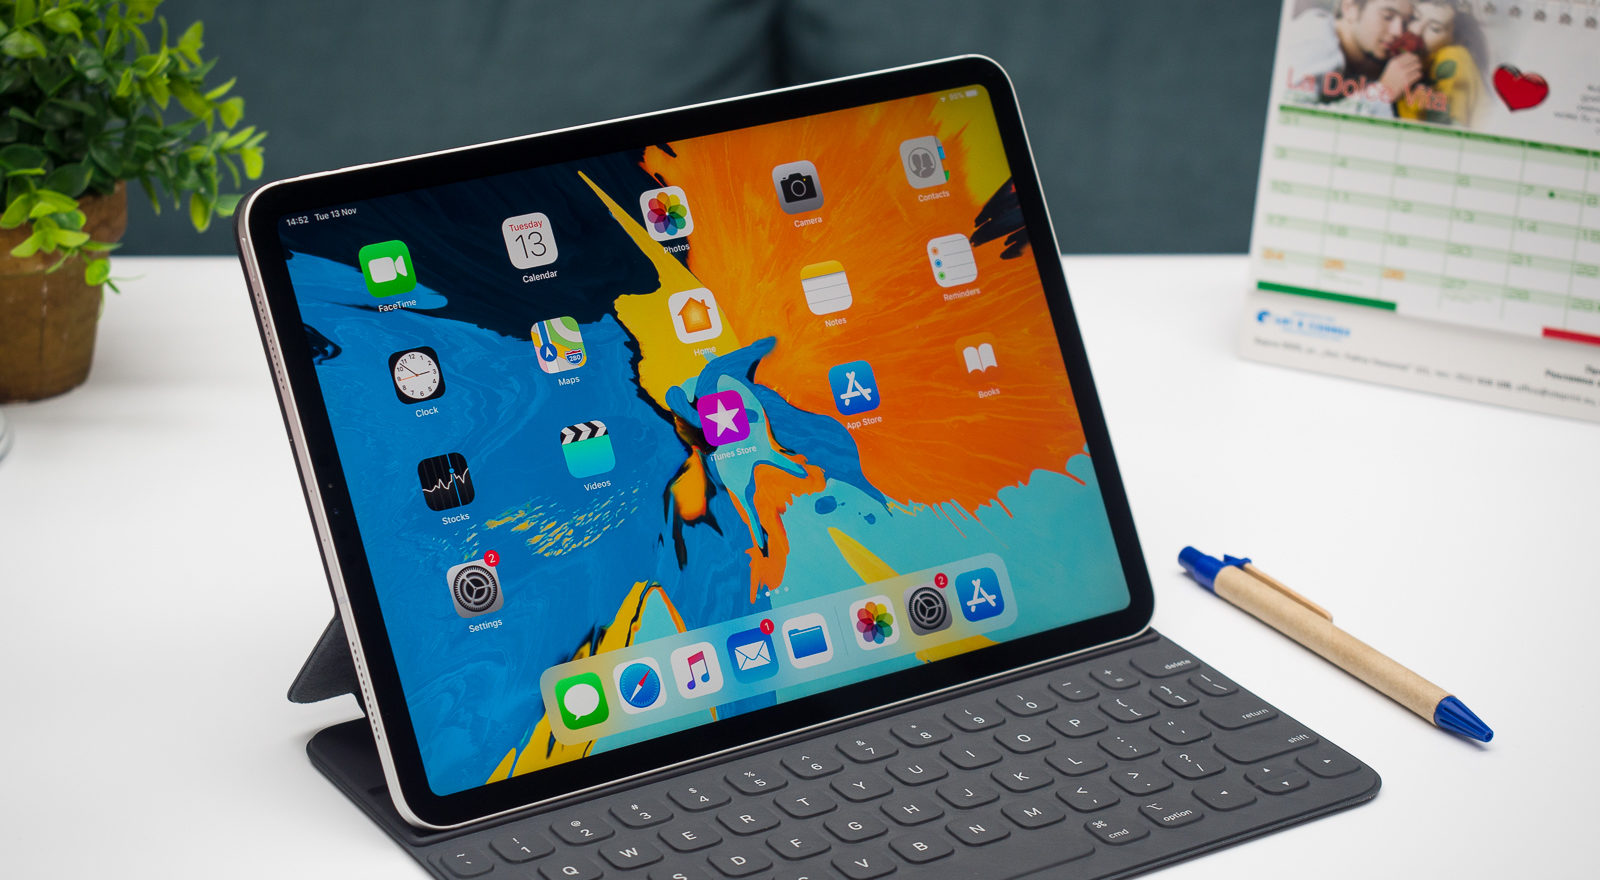 Apple iPad Pro 2020 Release Date, Specs, Price: 5G mmWave Support ...